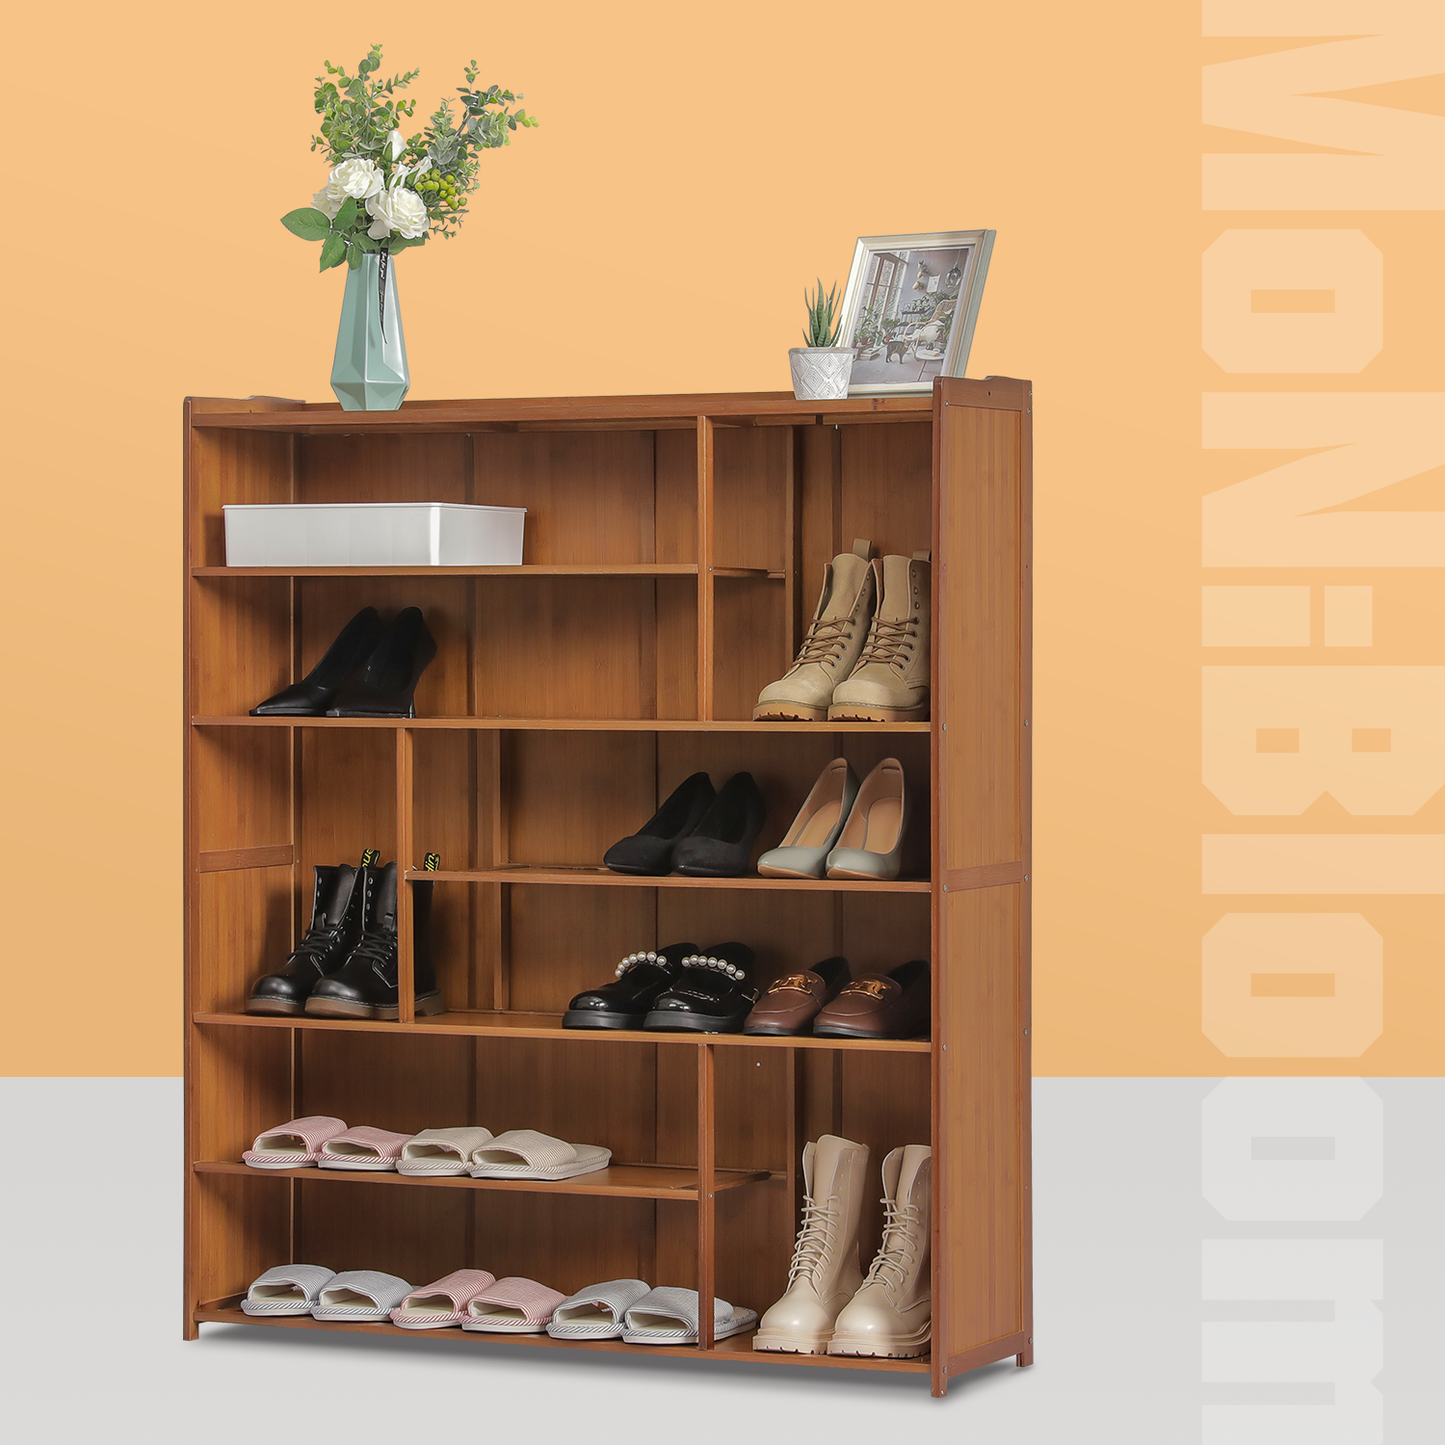 Shoe Organizer - Enclosed Back Panel with Boots Storage - 7 Tier - Brown